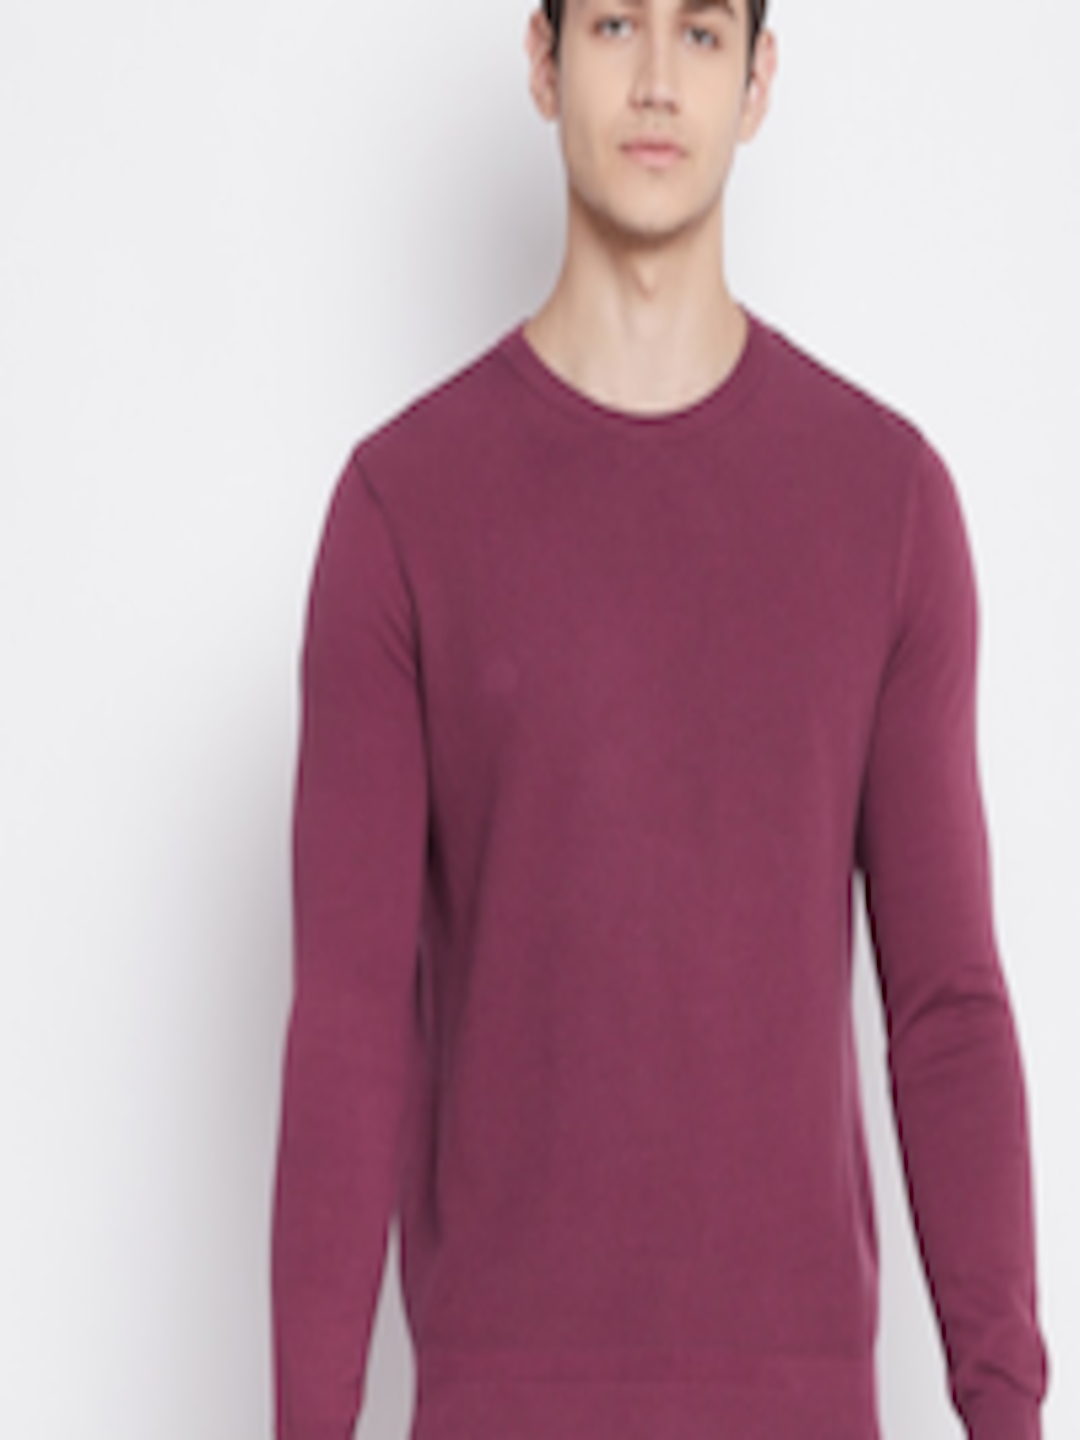 Buy Octave Men Burgundy Pullover Sweater - Sweaters for Men 15882690 ...